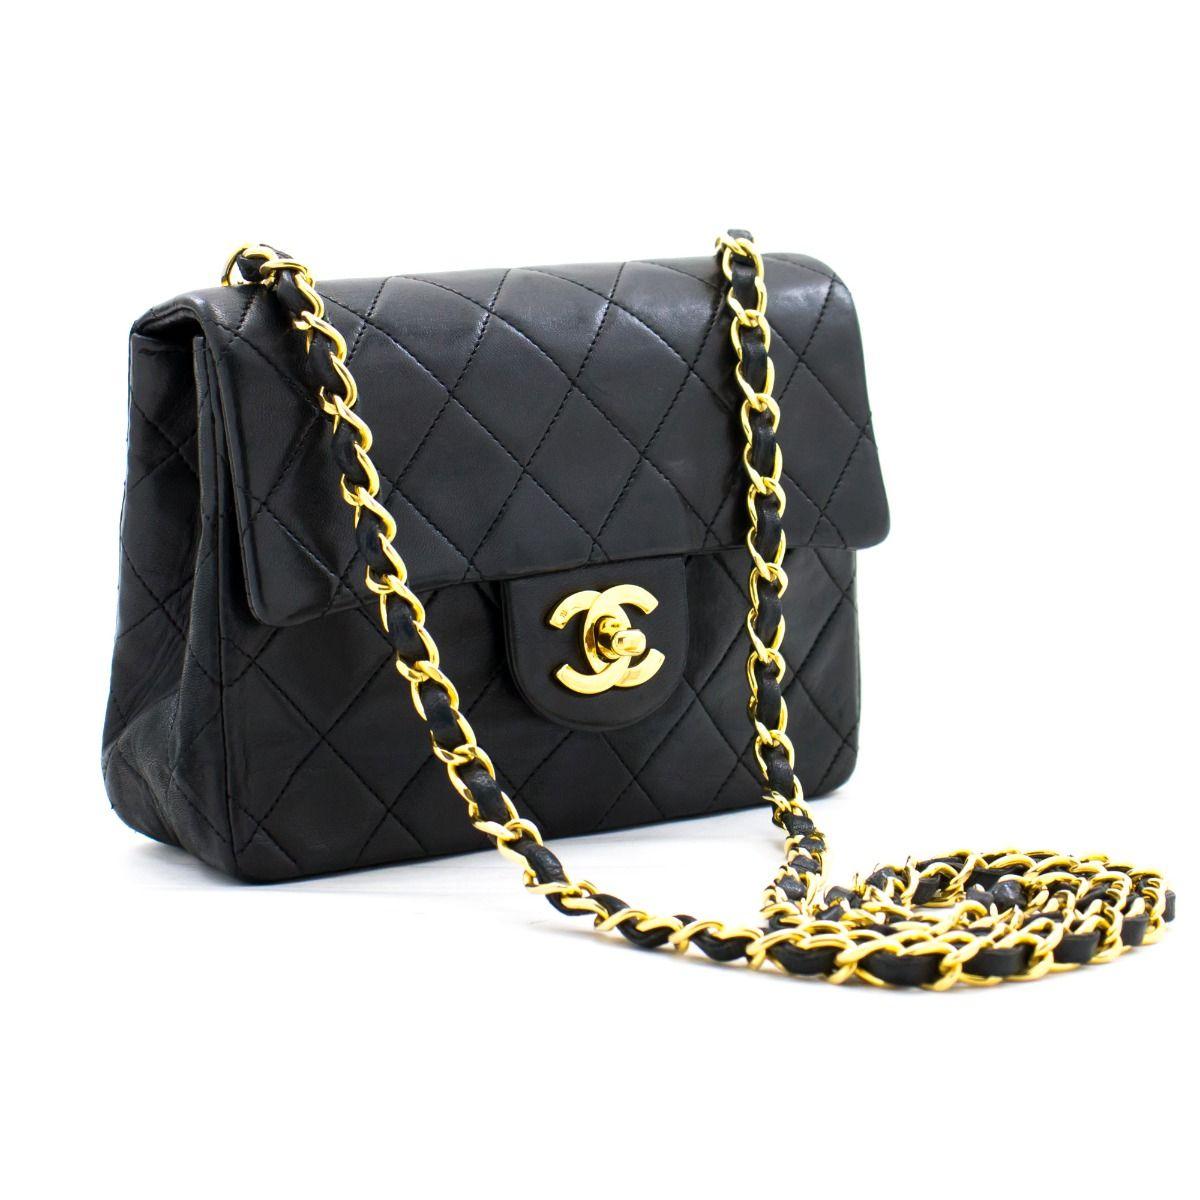 Looking for a classic that will never go out of style? Look no further. 

This iconic Mini Square Chanel bag is crafted from quilted black lambskin. On the front flap there is the classic CC logo twist lock, and on the second flap a stud closure